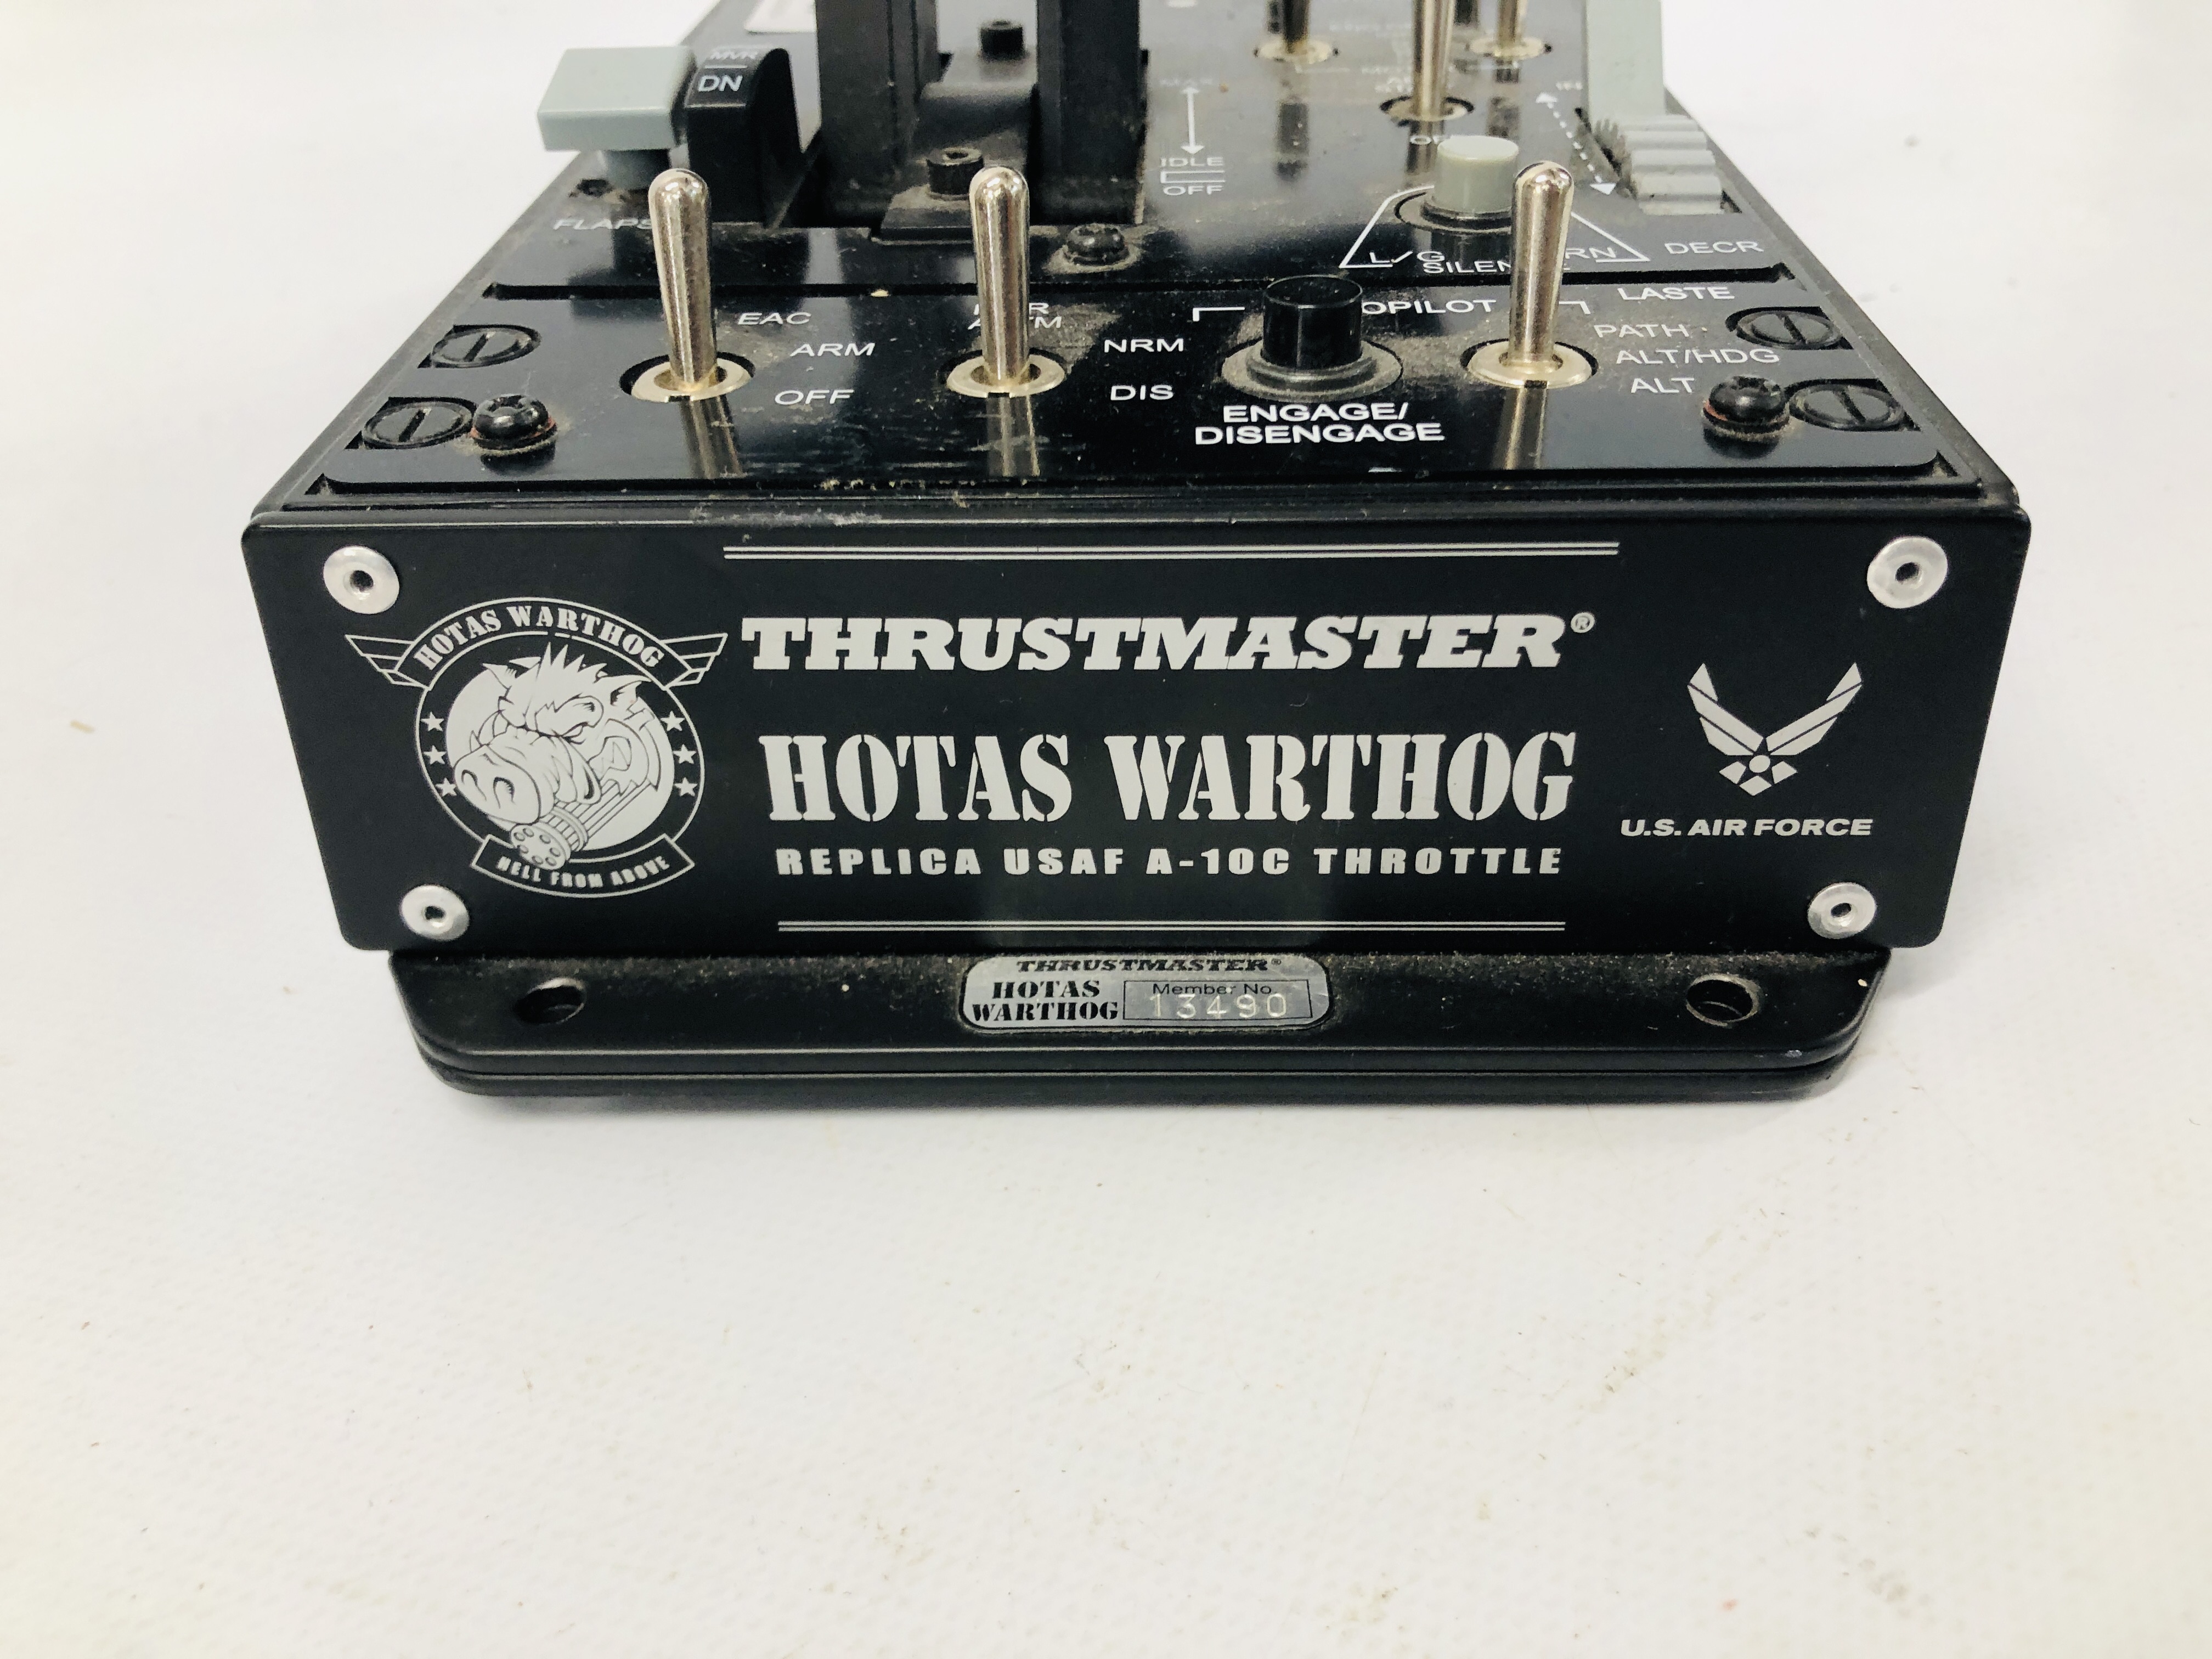 THRUSMASTER HOTAS WARTHOG REPLICA US AF A-10 C THROTTLE COMPUTER CONTROLLER - SOLD AS SEEN - Image 2 of 5